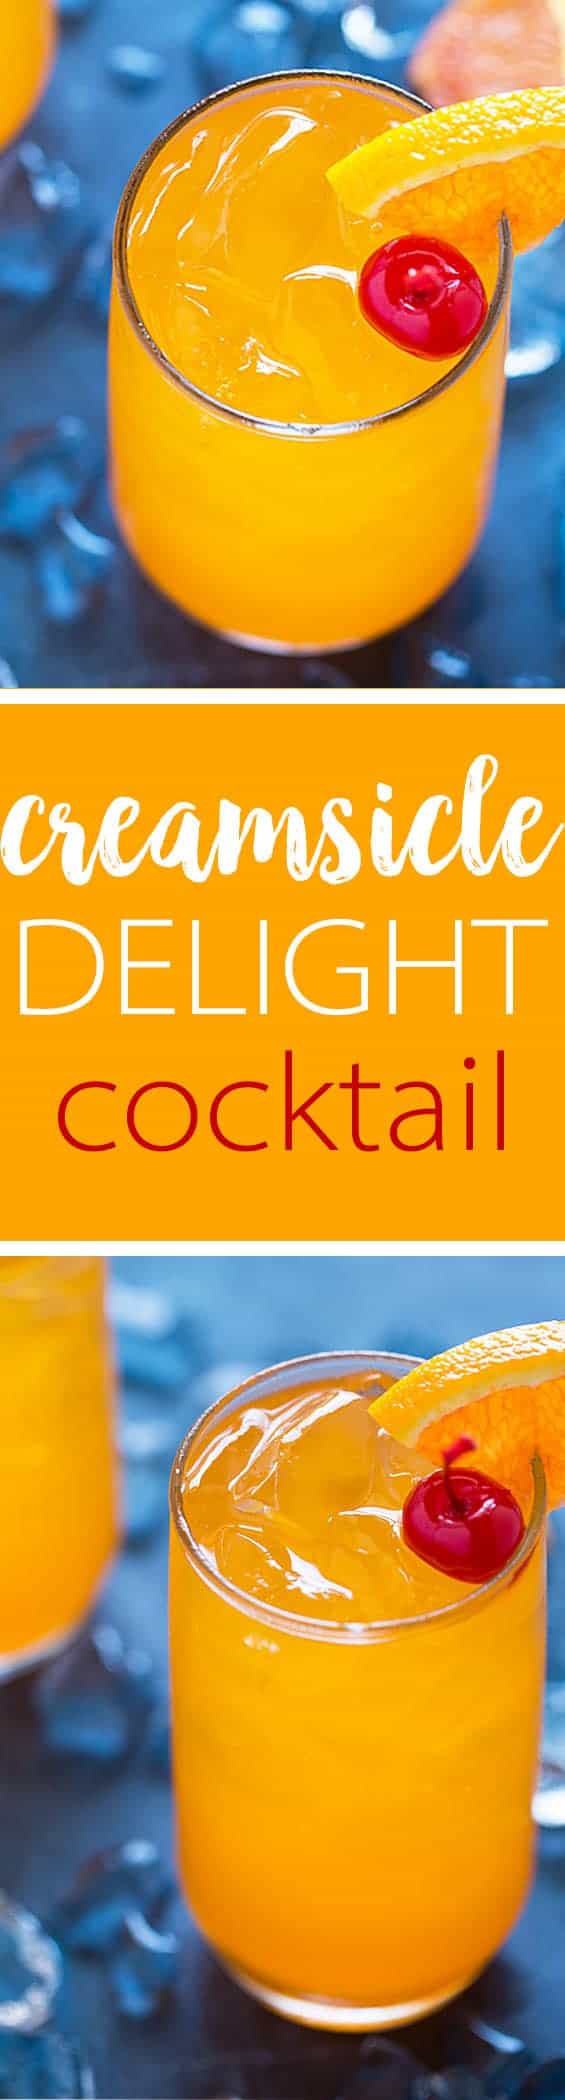 Two images of an orange cocktail.  Text in center says creamsicle delight cocktail.